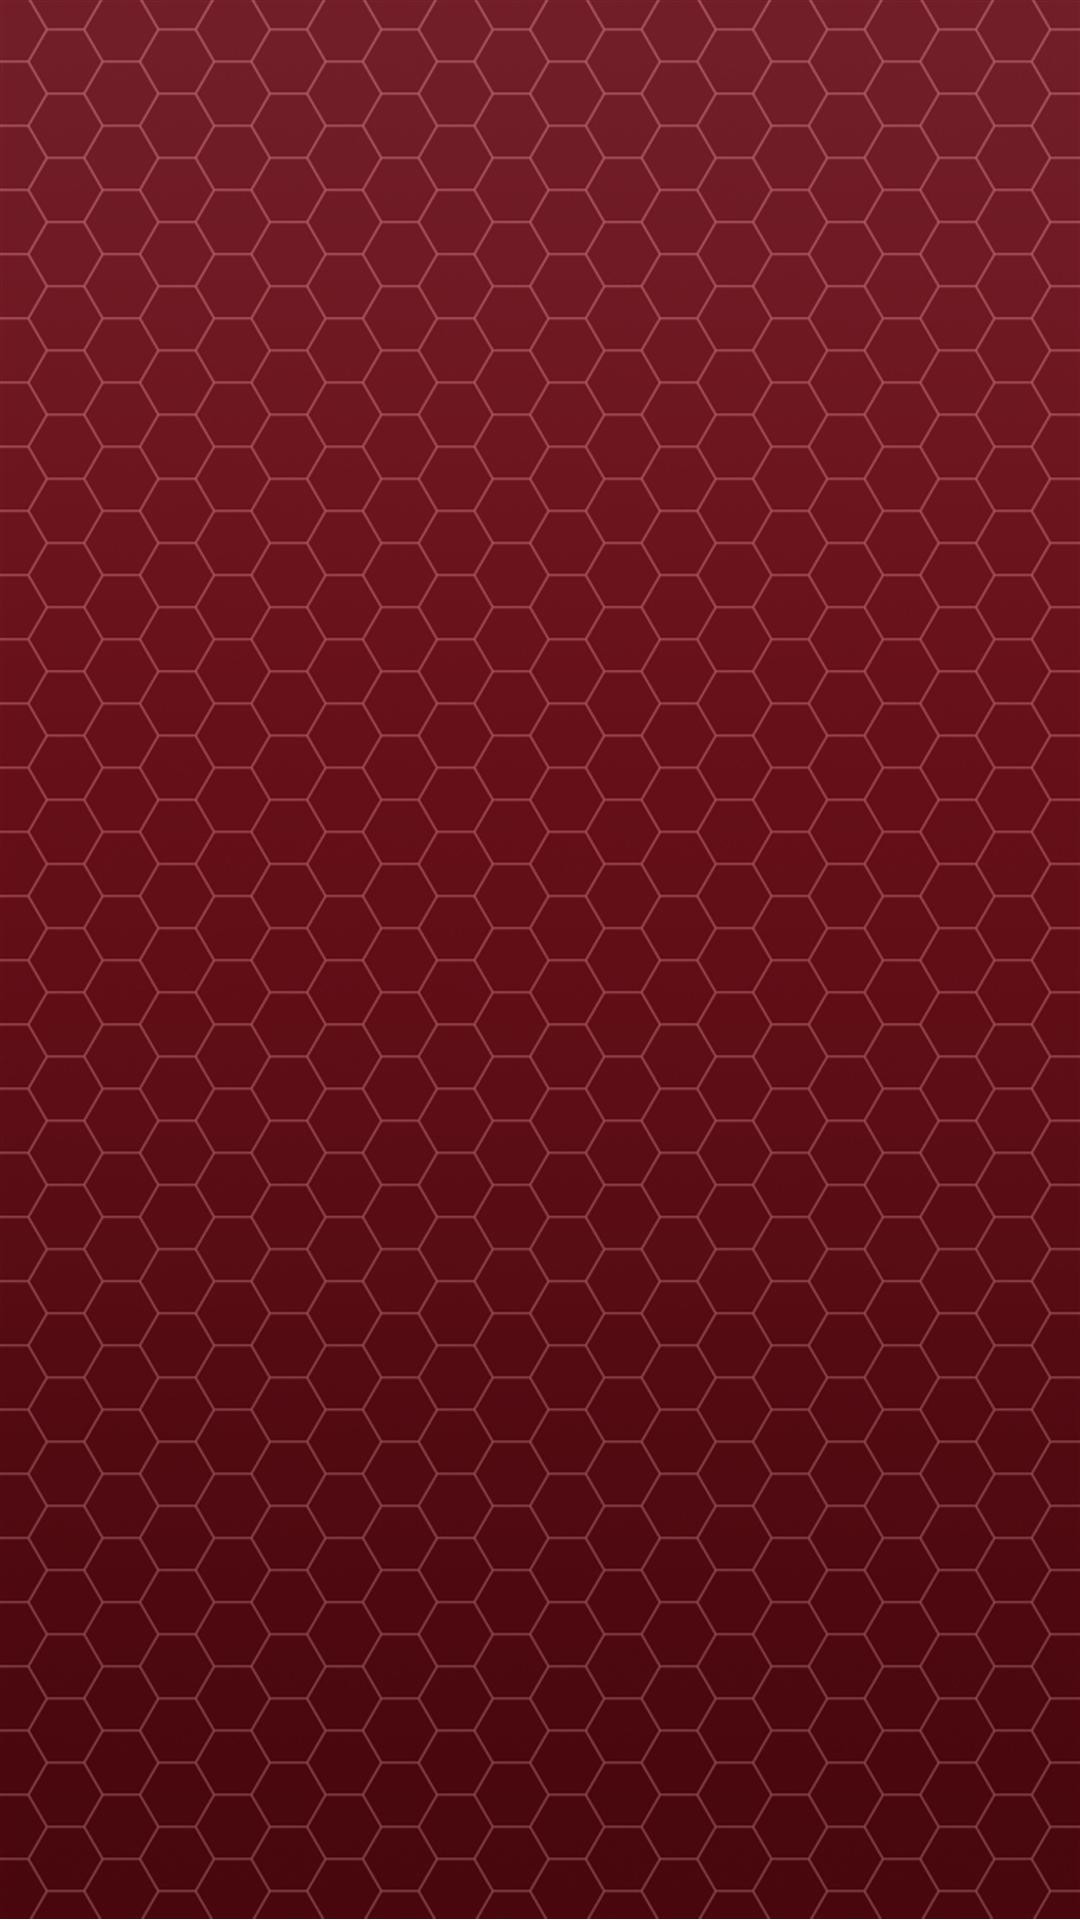 1080x1920 Honeycomb Red Pattern Android Wallpaper ...